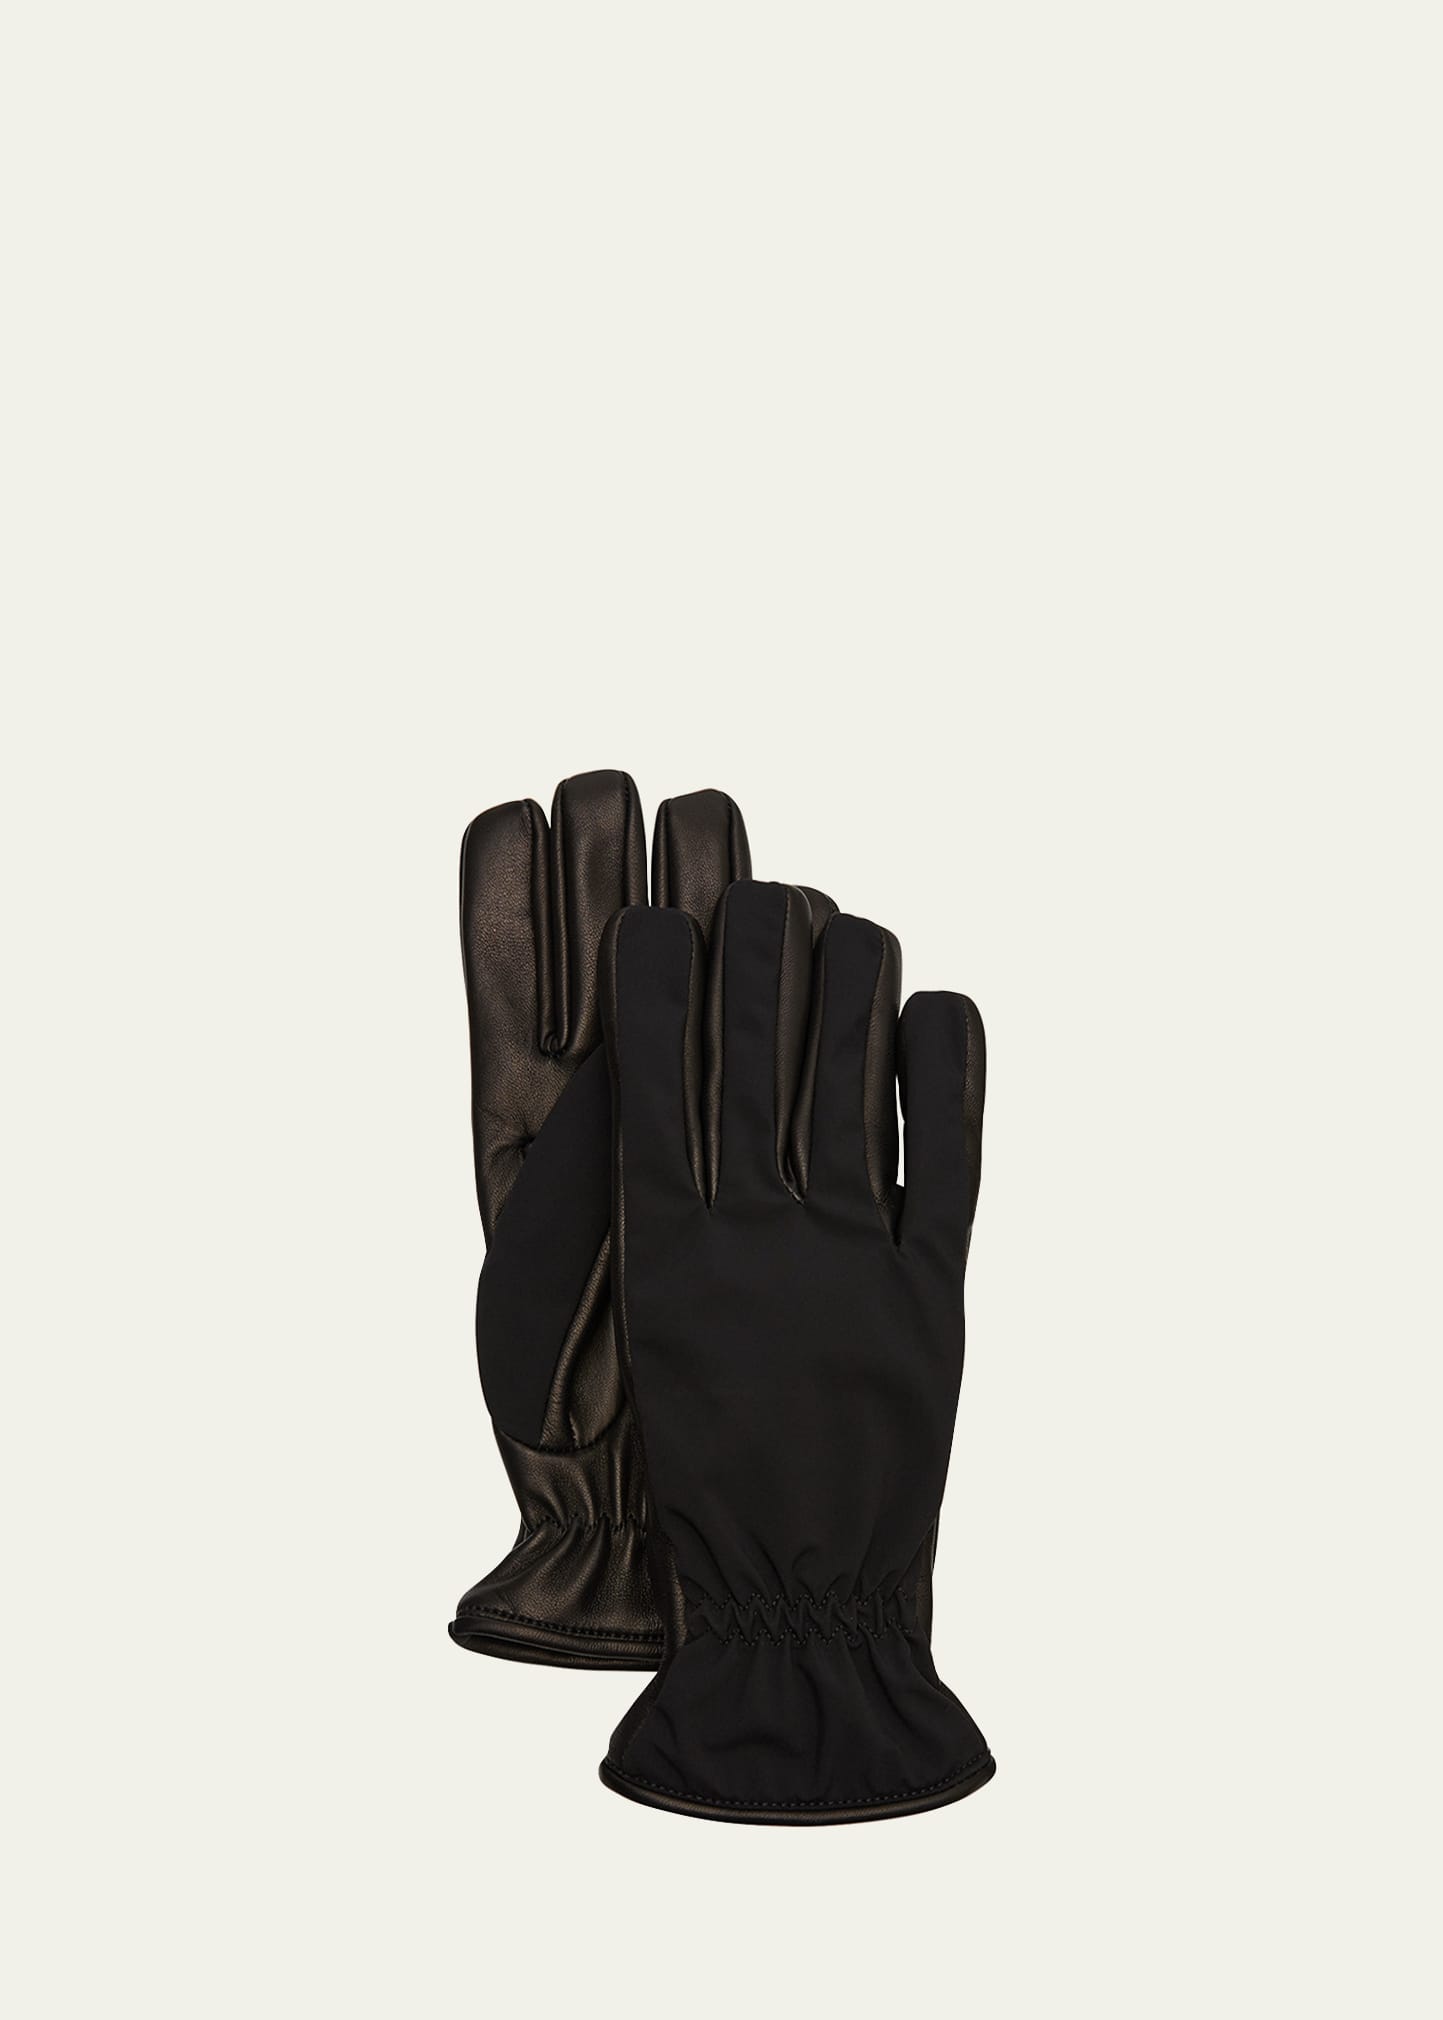 Men's Tonal Leather/Suede Gloves